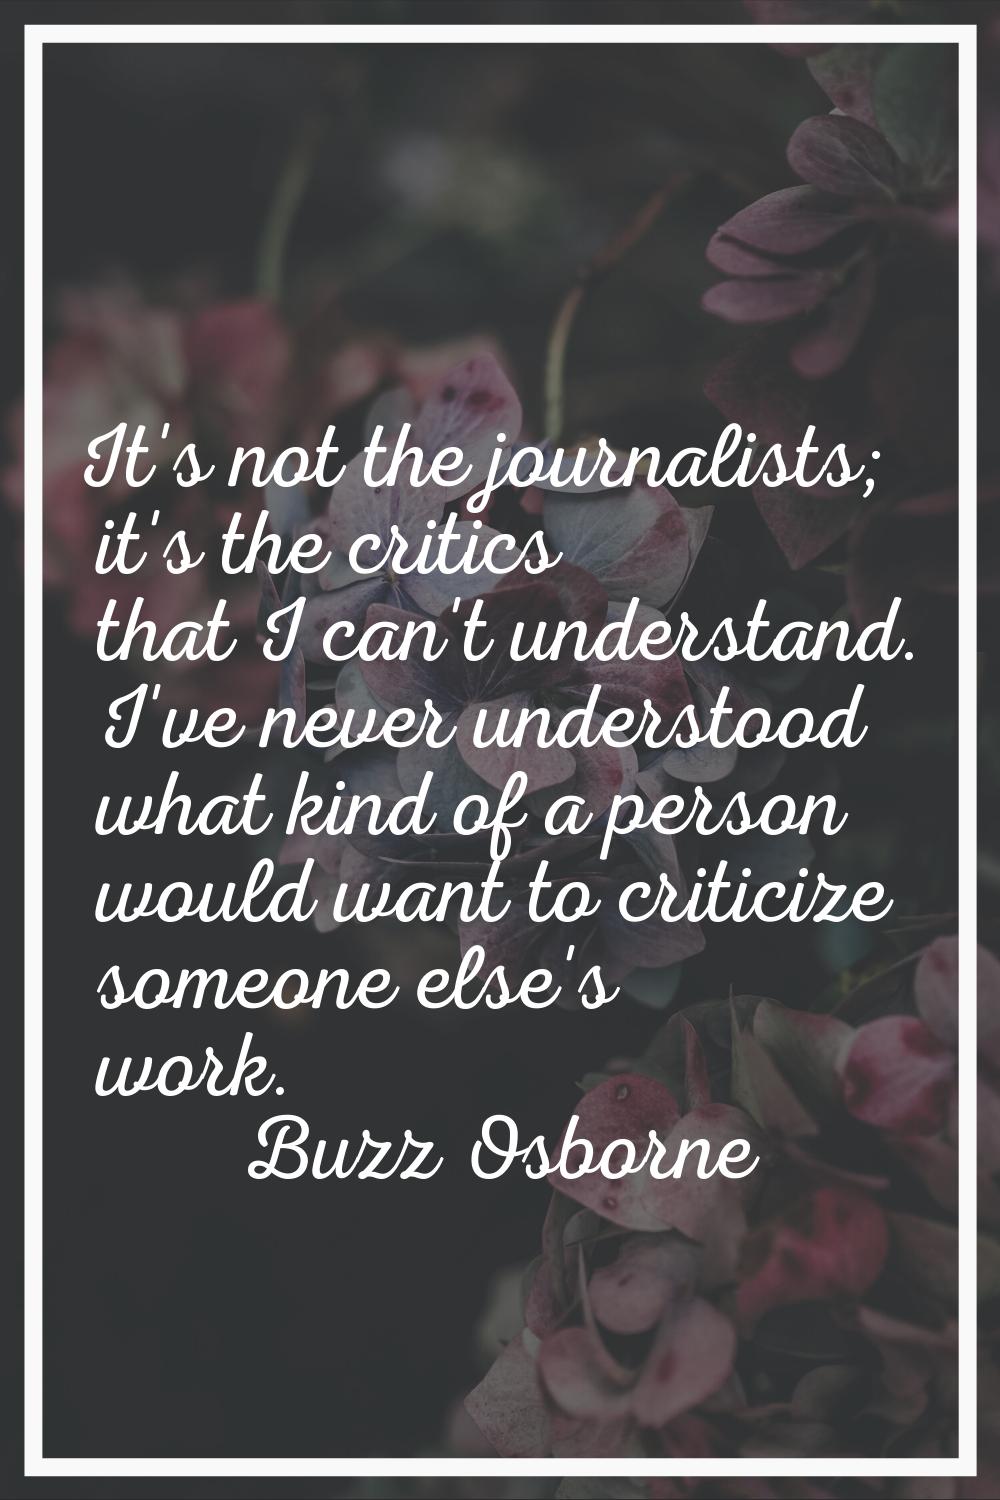 It's not the journalists; it's the critics that I can't understand. I've never understood what kind